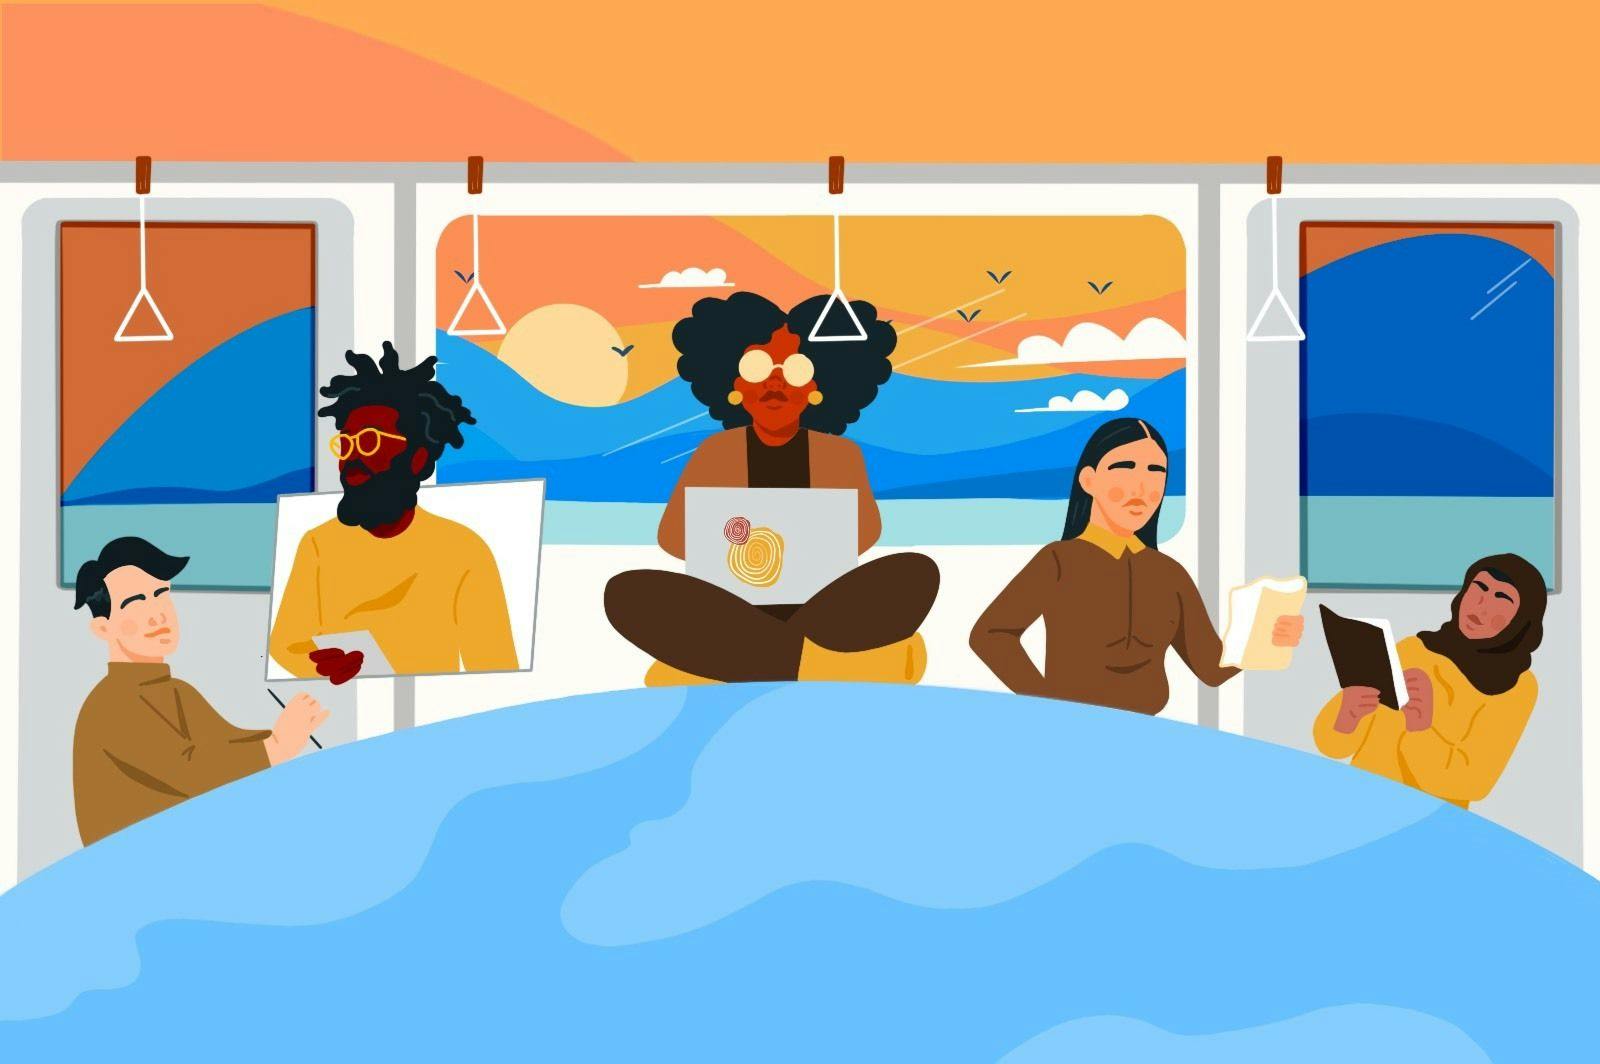 Illustration of five people sitting around a round, light blue table. Behind them are what looks like the walls of a bus, with hanging straps for passengers to grip, and a view of a sunset over mountains. The people represent a variety of skin tones, ethnicities and backgrounds: two are Black, one woman wears a hijab, and they are performing activities such as reading, working on a laptop, and conversing with each other.